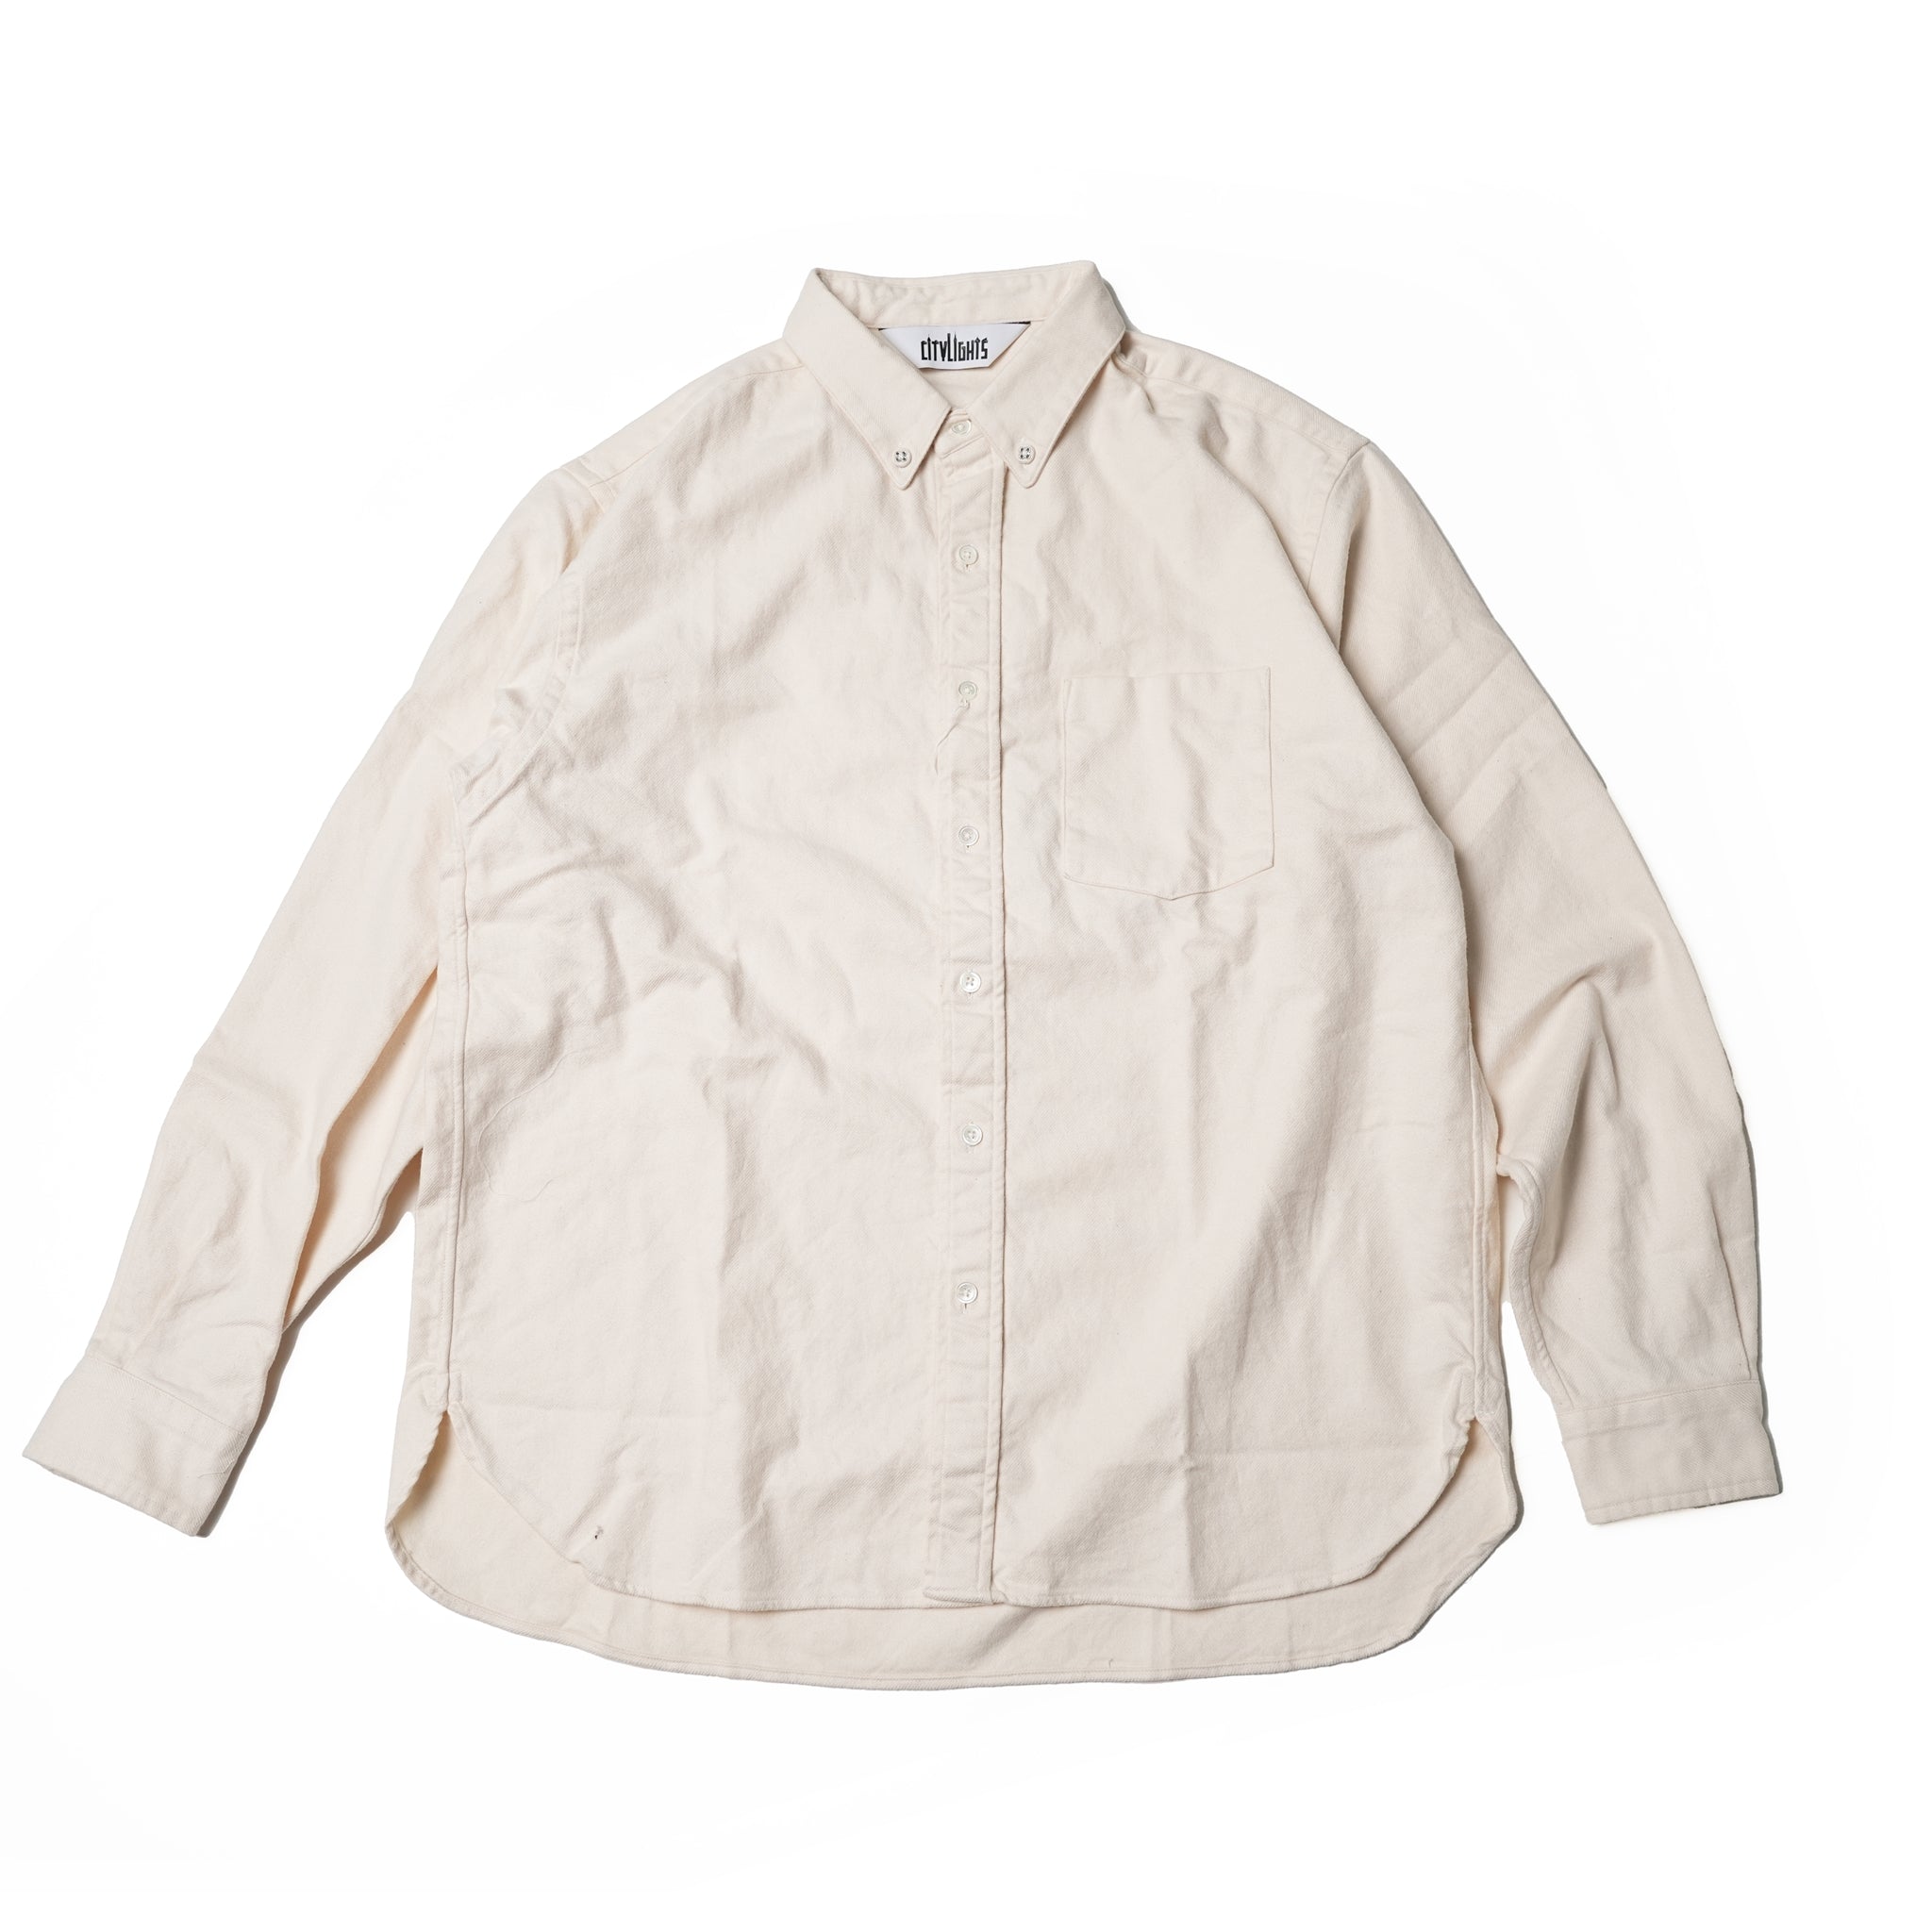 Name: BD SHIRTS | Color:Ecru | Size:Regular/Tall 【CITYLIGHTS PRODUCTS_シティライツプロダクツ】